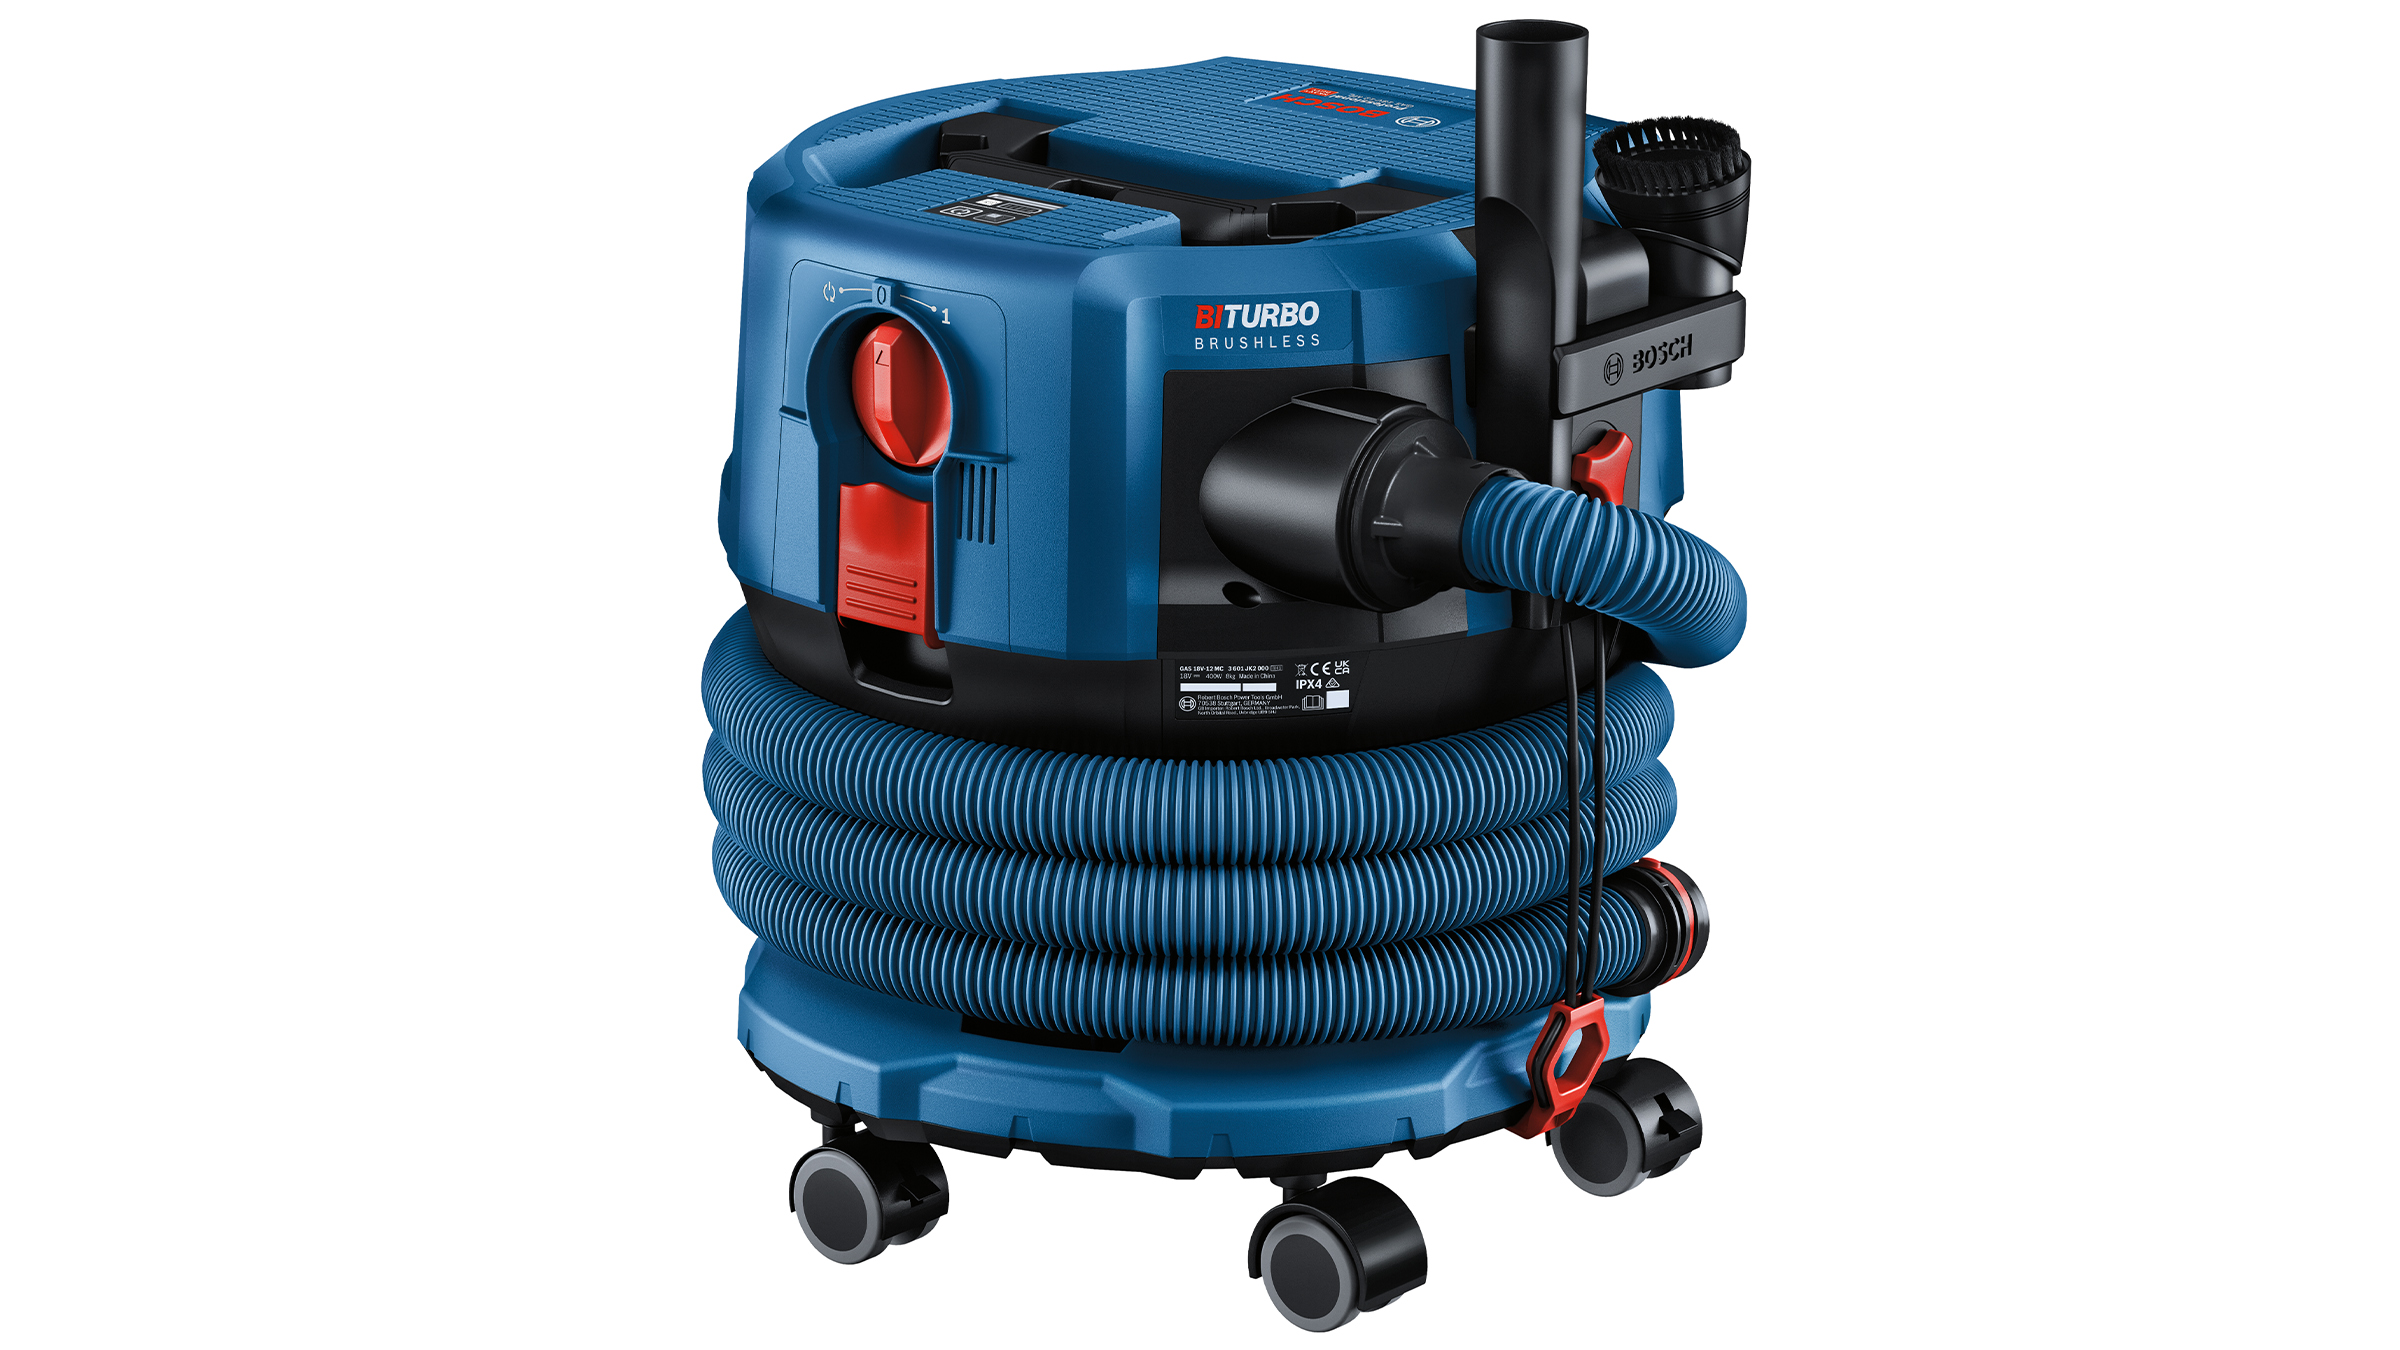 Simple working with low dust levels in the Professional 18V System: First Bosch Professional M class cordless dust extractor